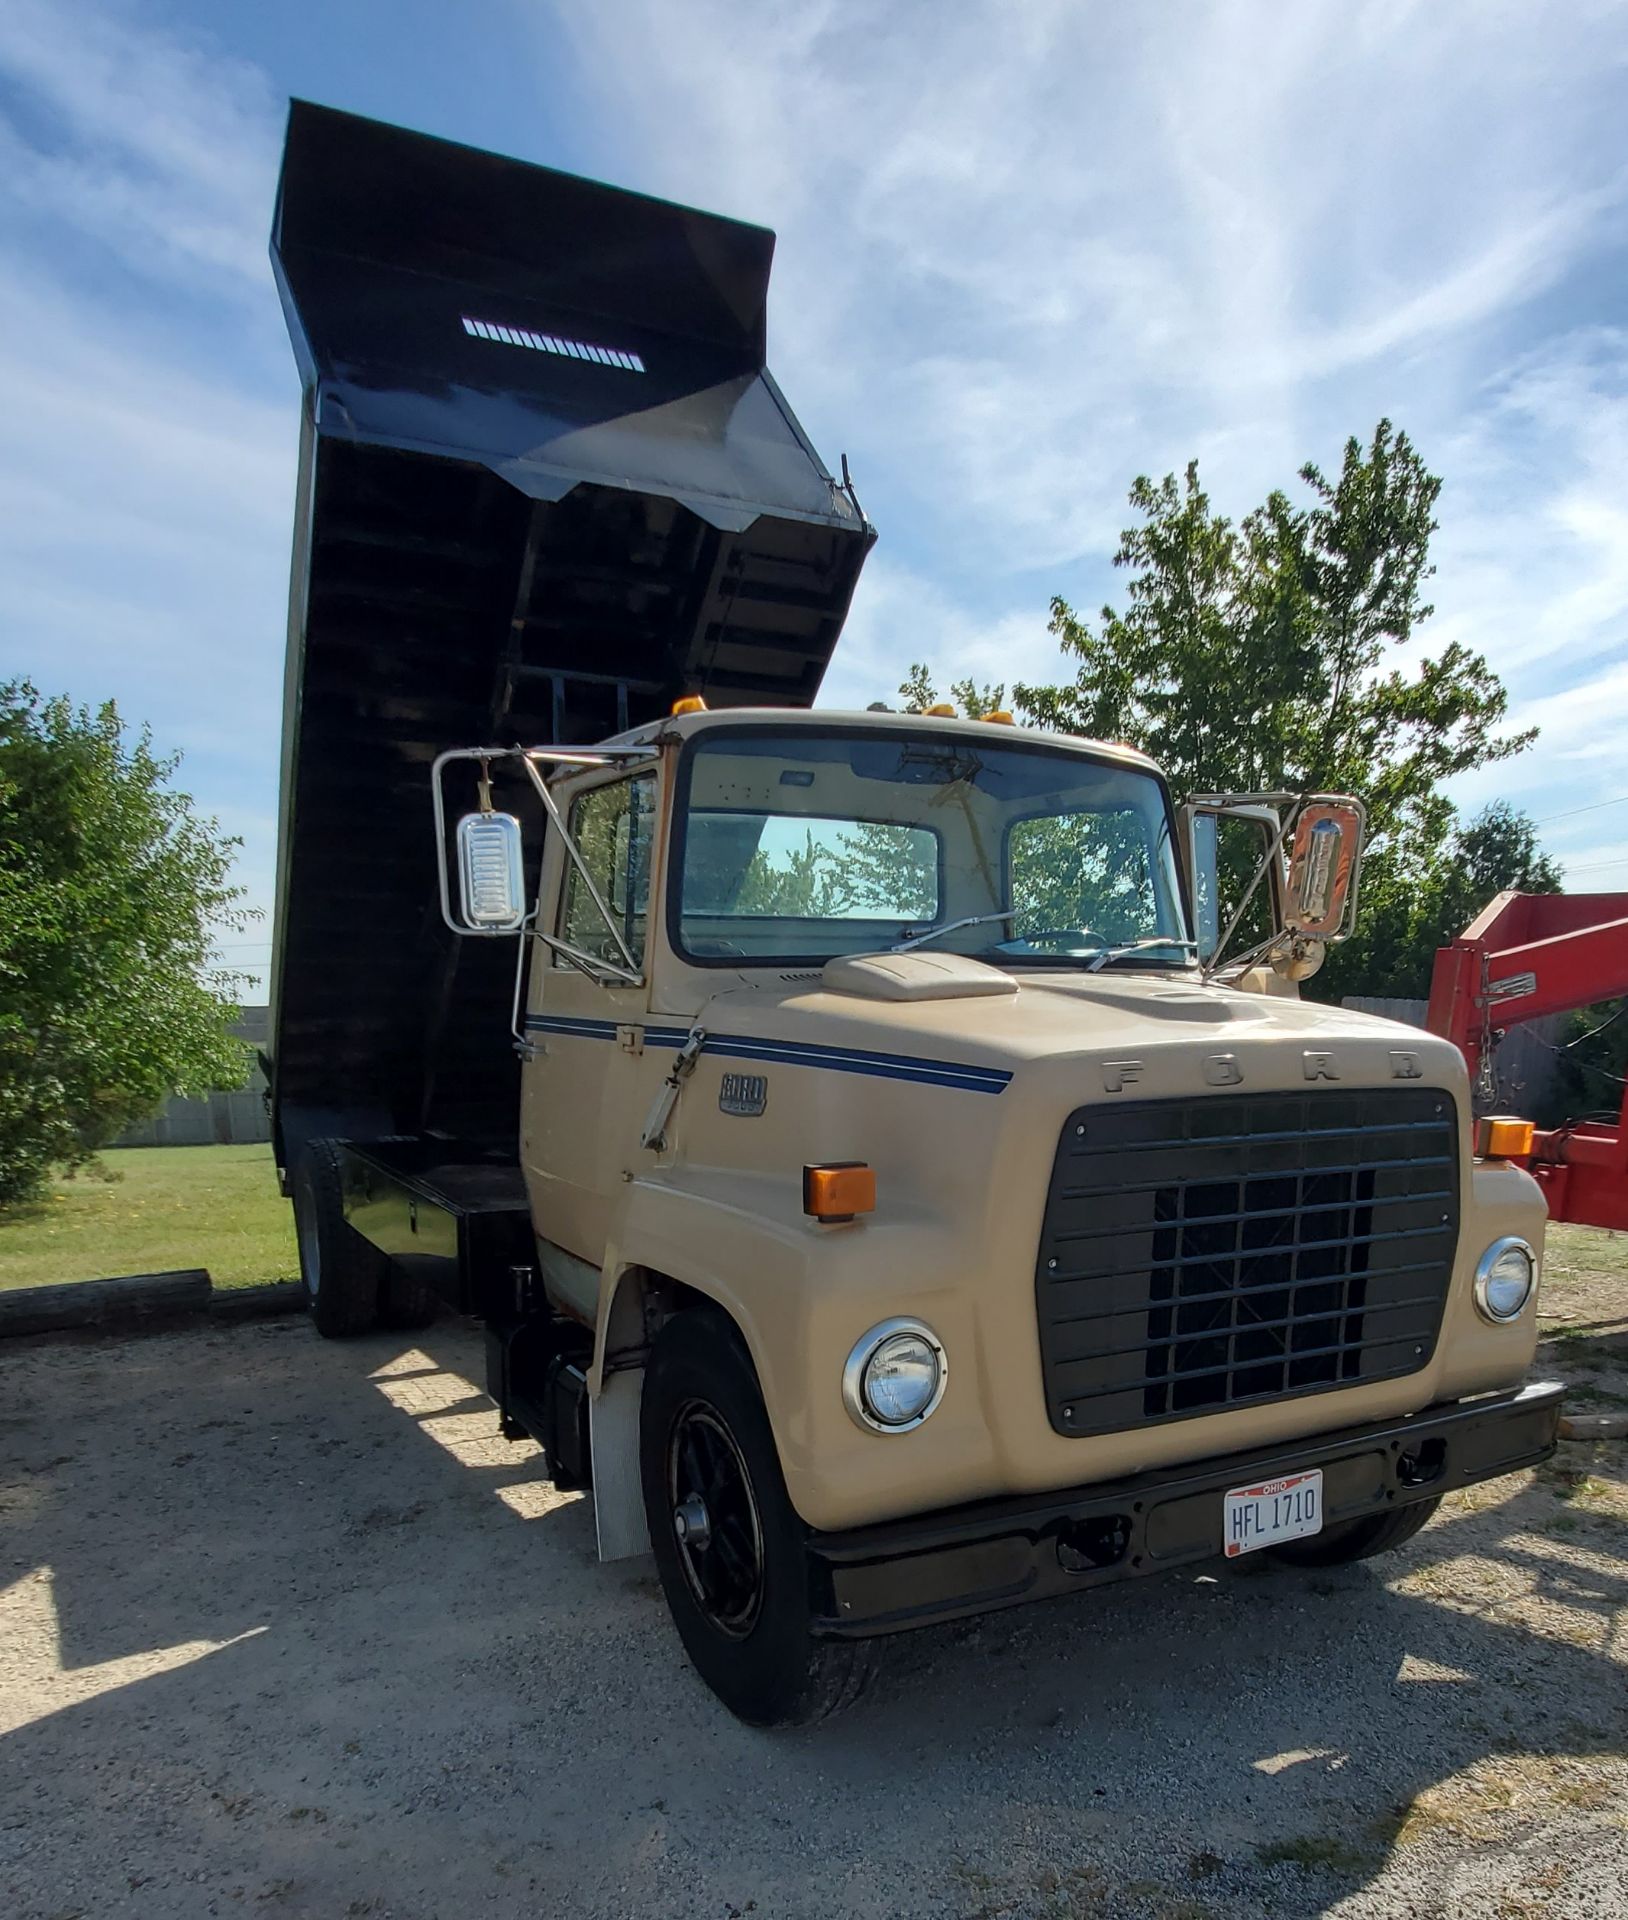 1983 Ford 7000, 5-speed Manual Transmission, Caterpillar 3208 Diesel, 14" Dump Bed,UR 225 Tires, New - Image 15 of 25